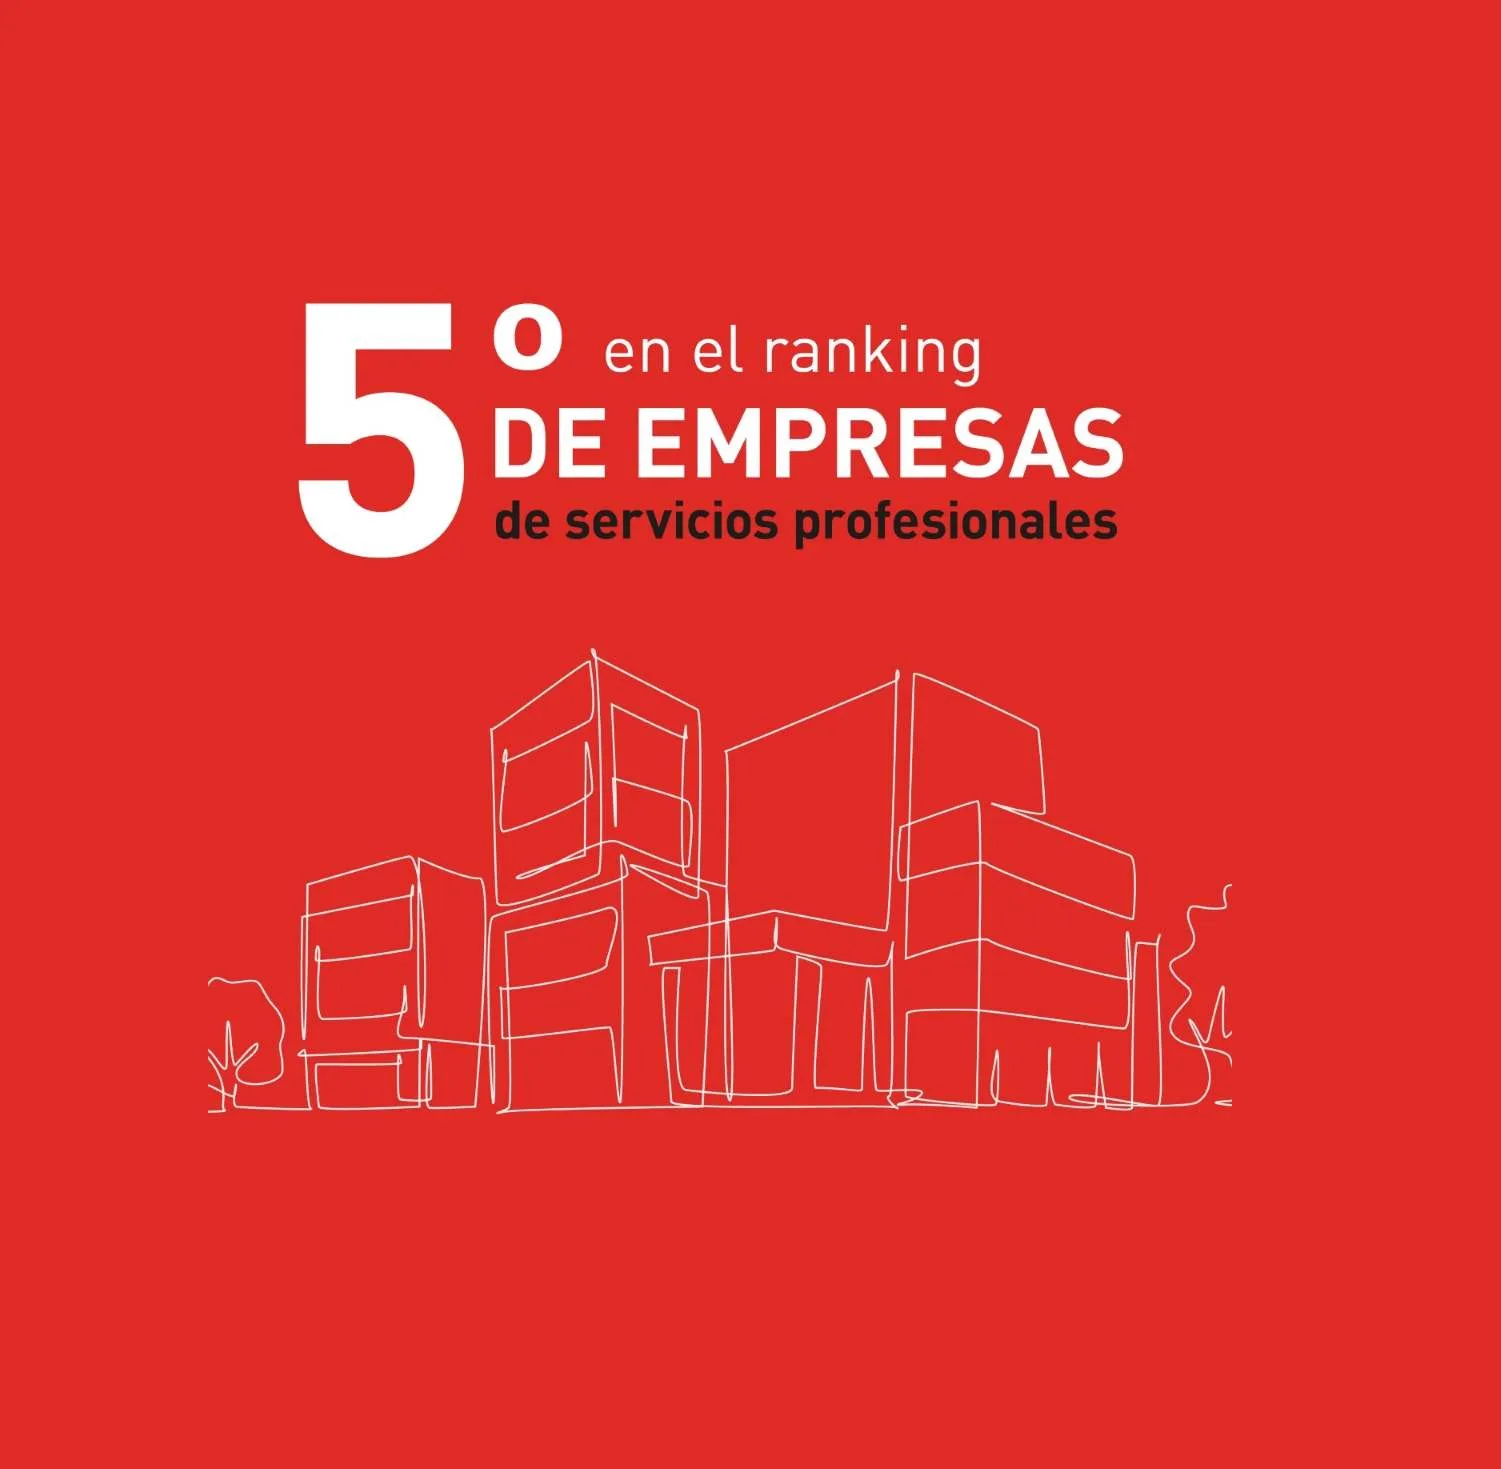 ranking of professional service firms in Spain by Expansión and El Economista newspapers